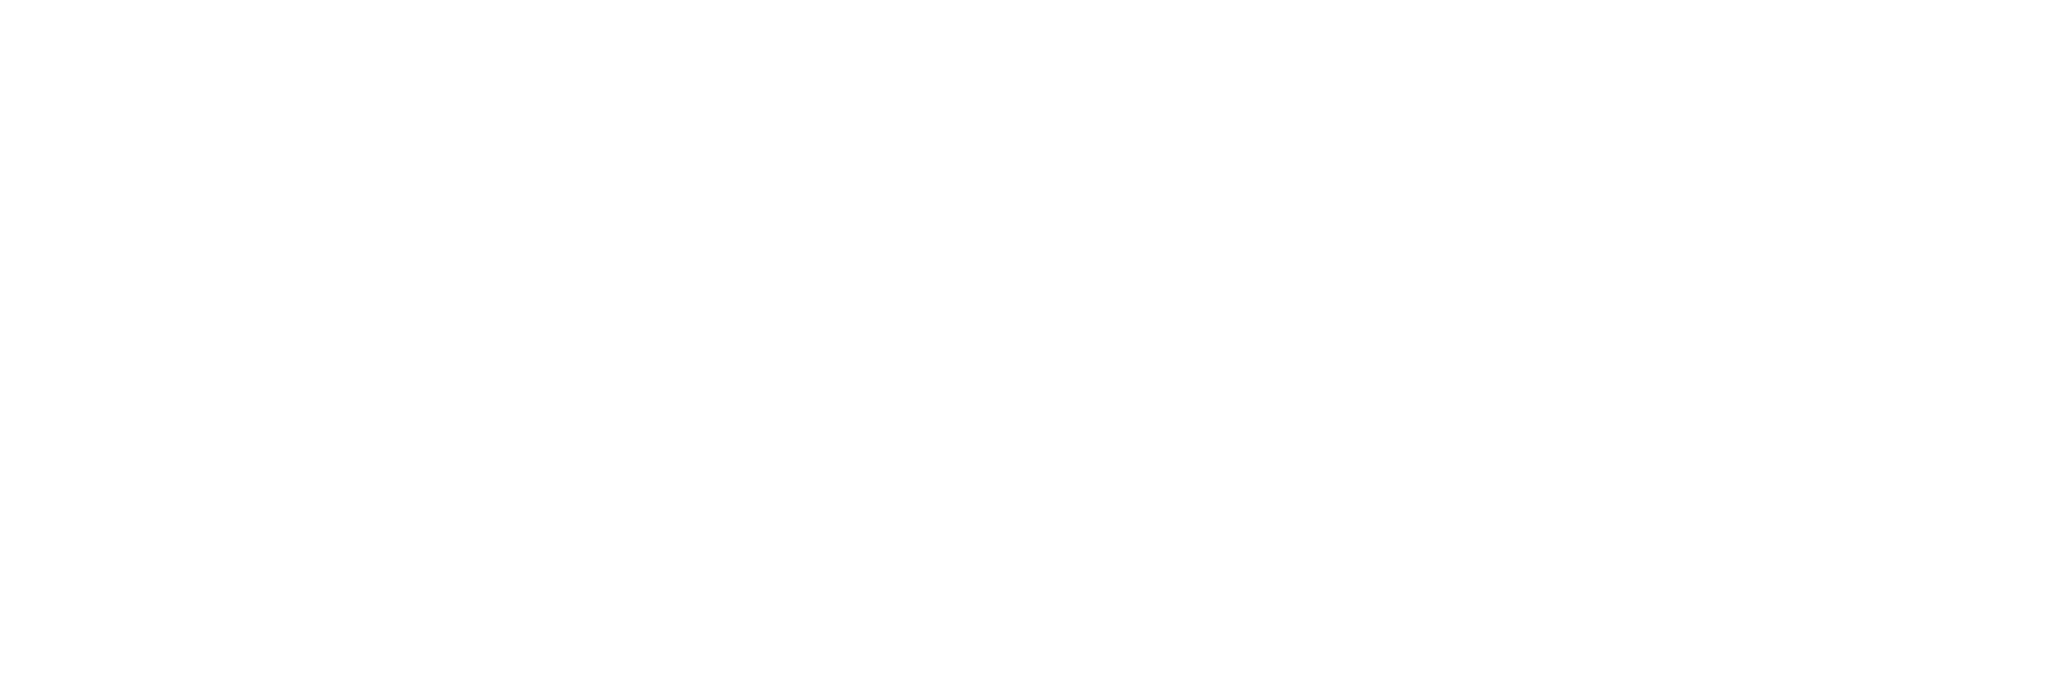 Clearinghouse for Military Family Readiness: A Penn State Applied Research Center Mark